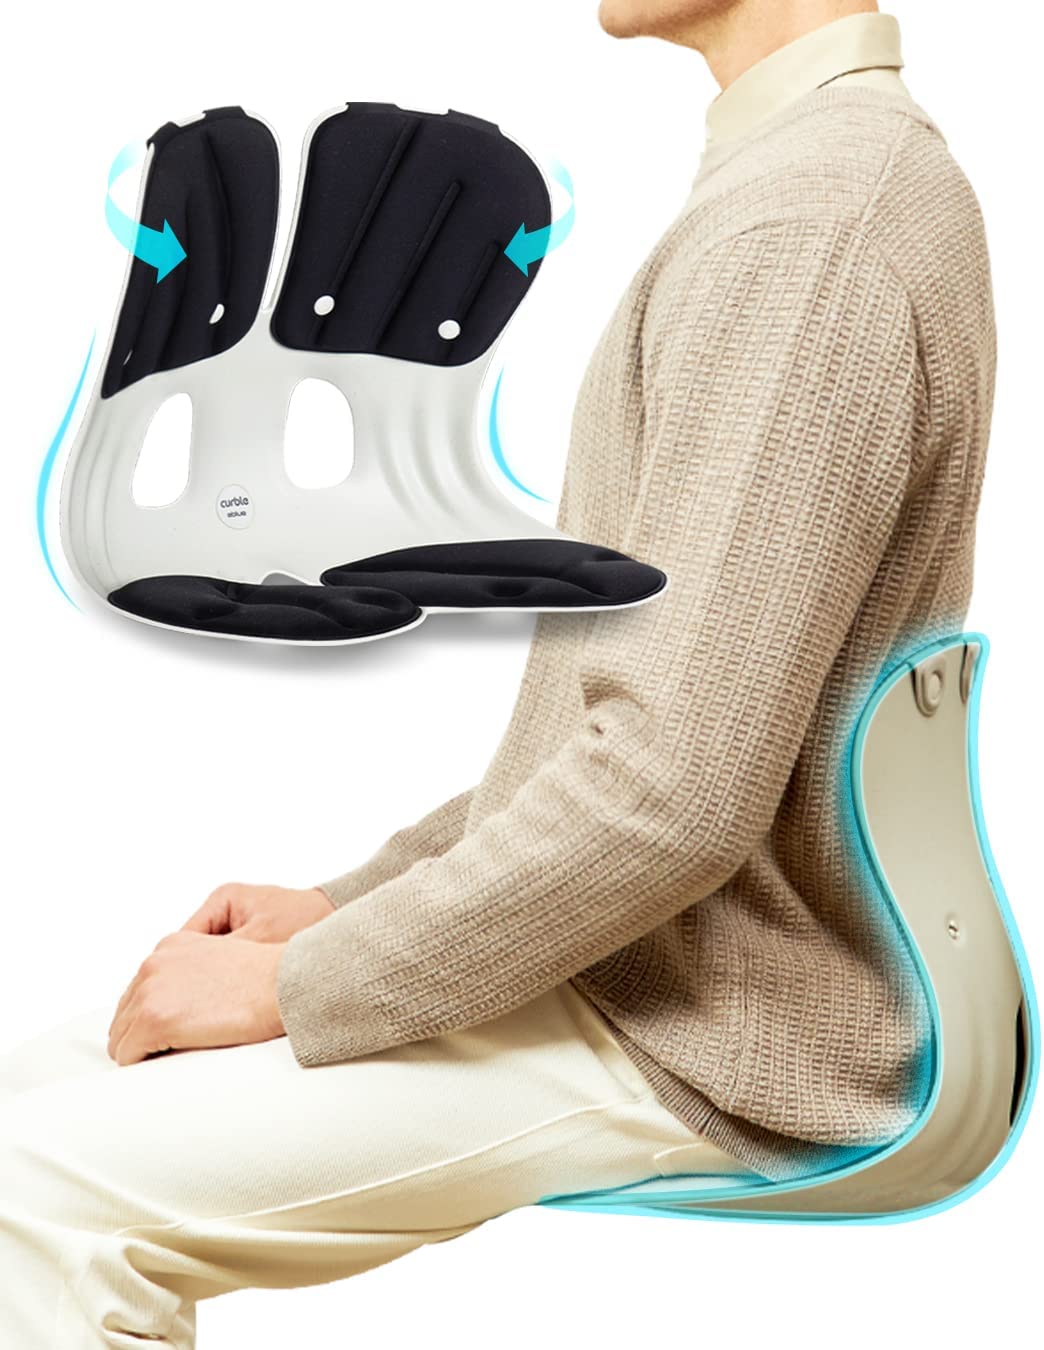 curble Chair [Adult] Ergonomic Back and Lumbar Support [...]